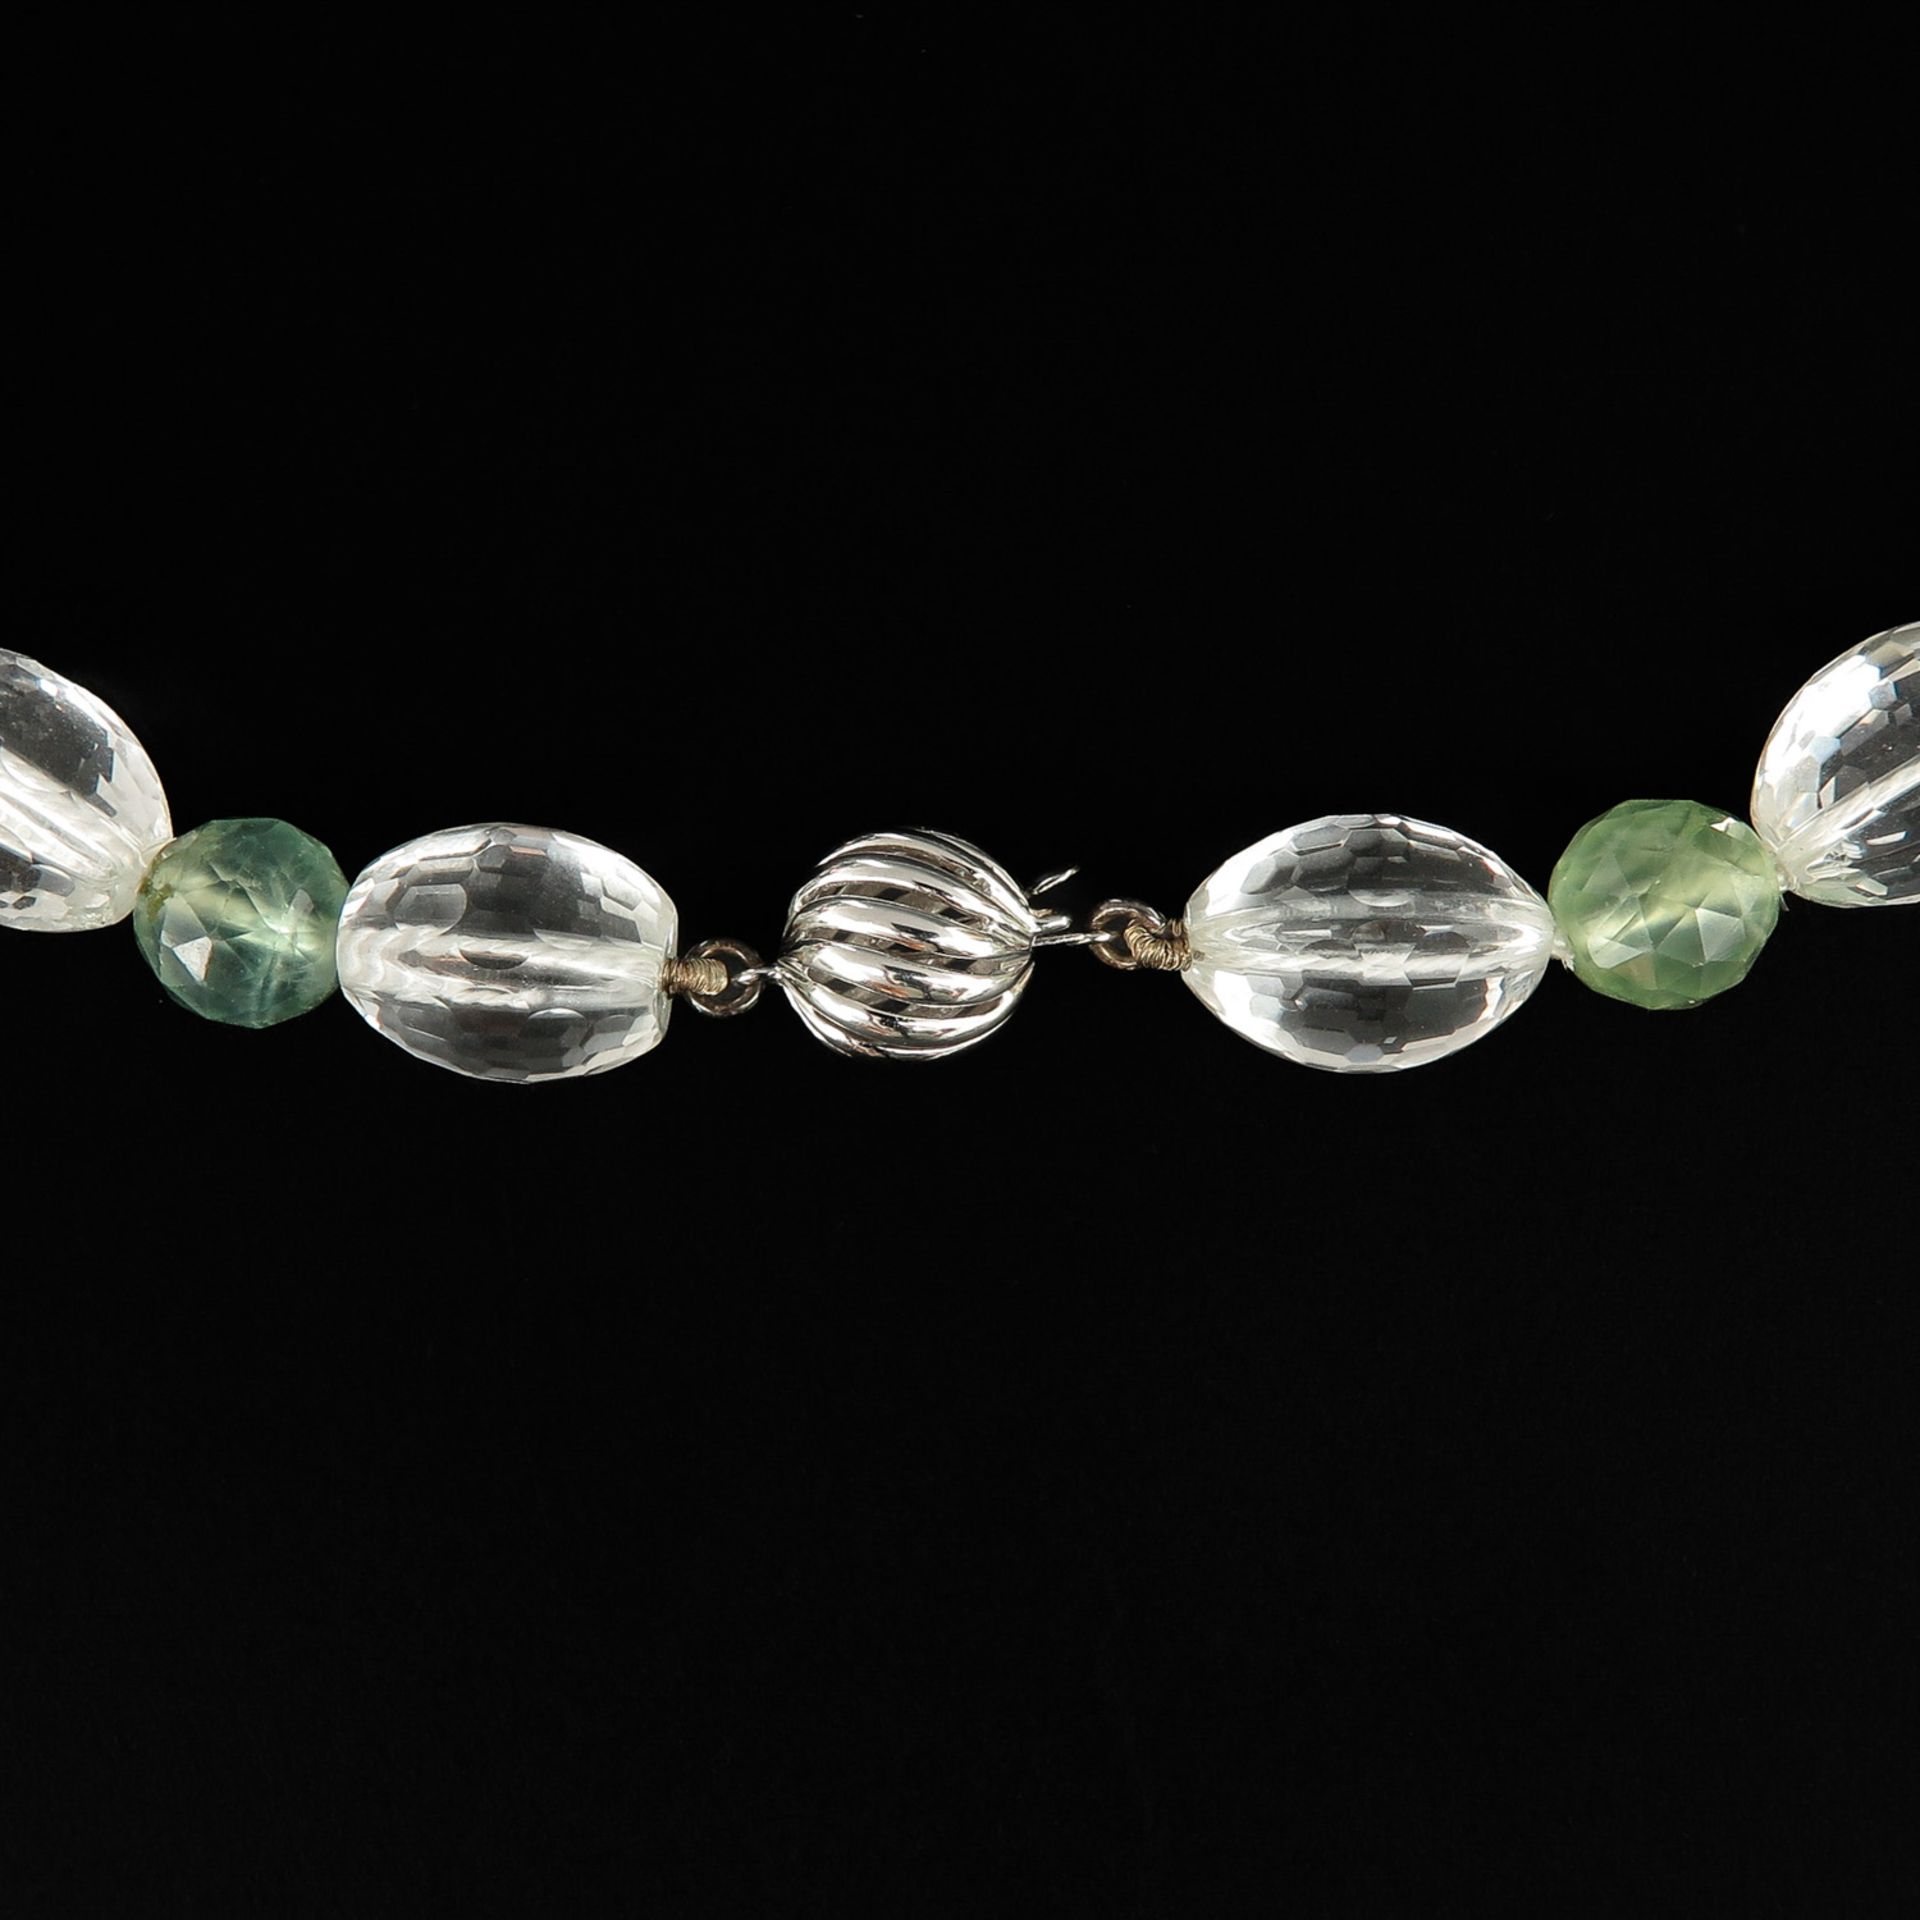 A Rock Crystal Necklace with 14KG Clasp - Image 4 of 6